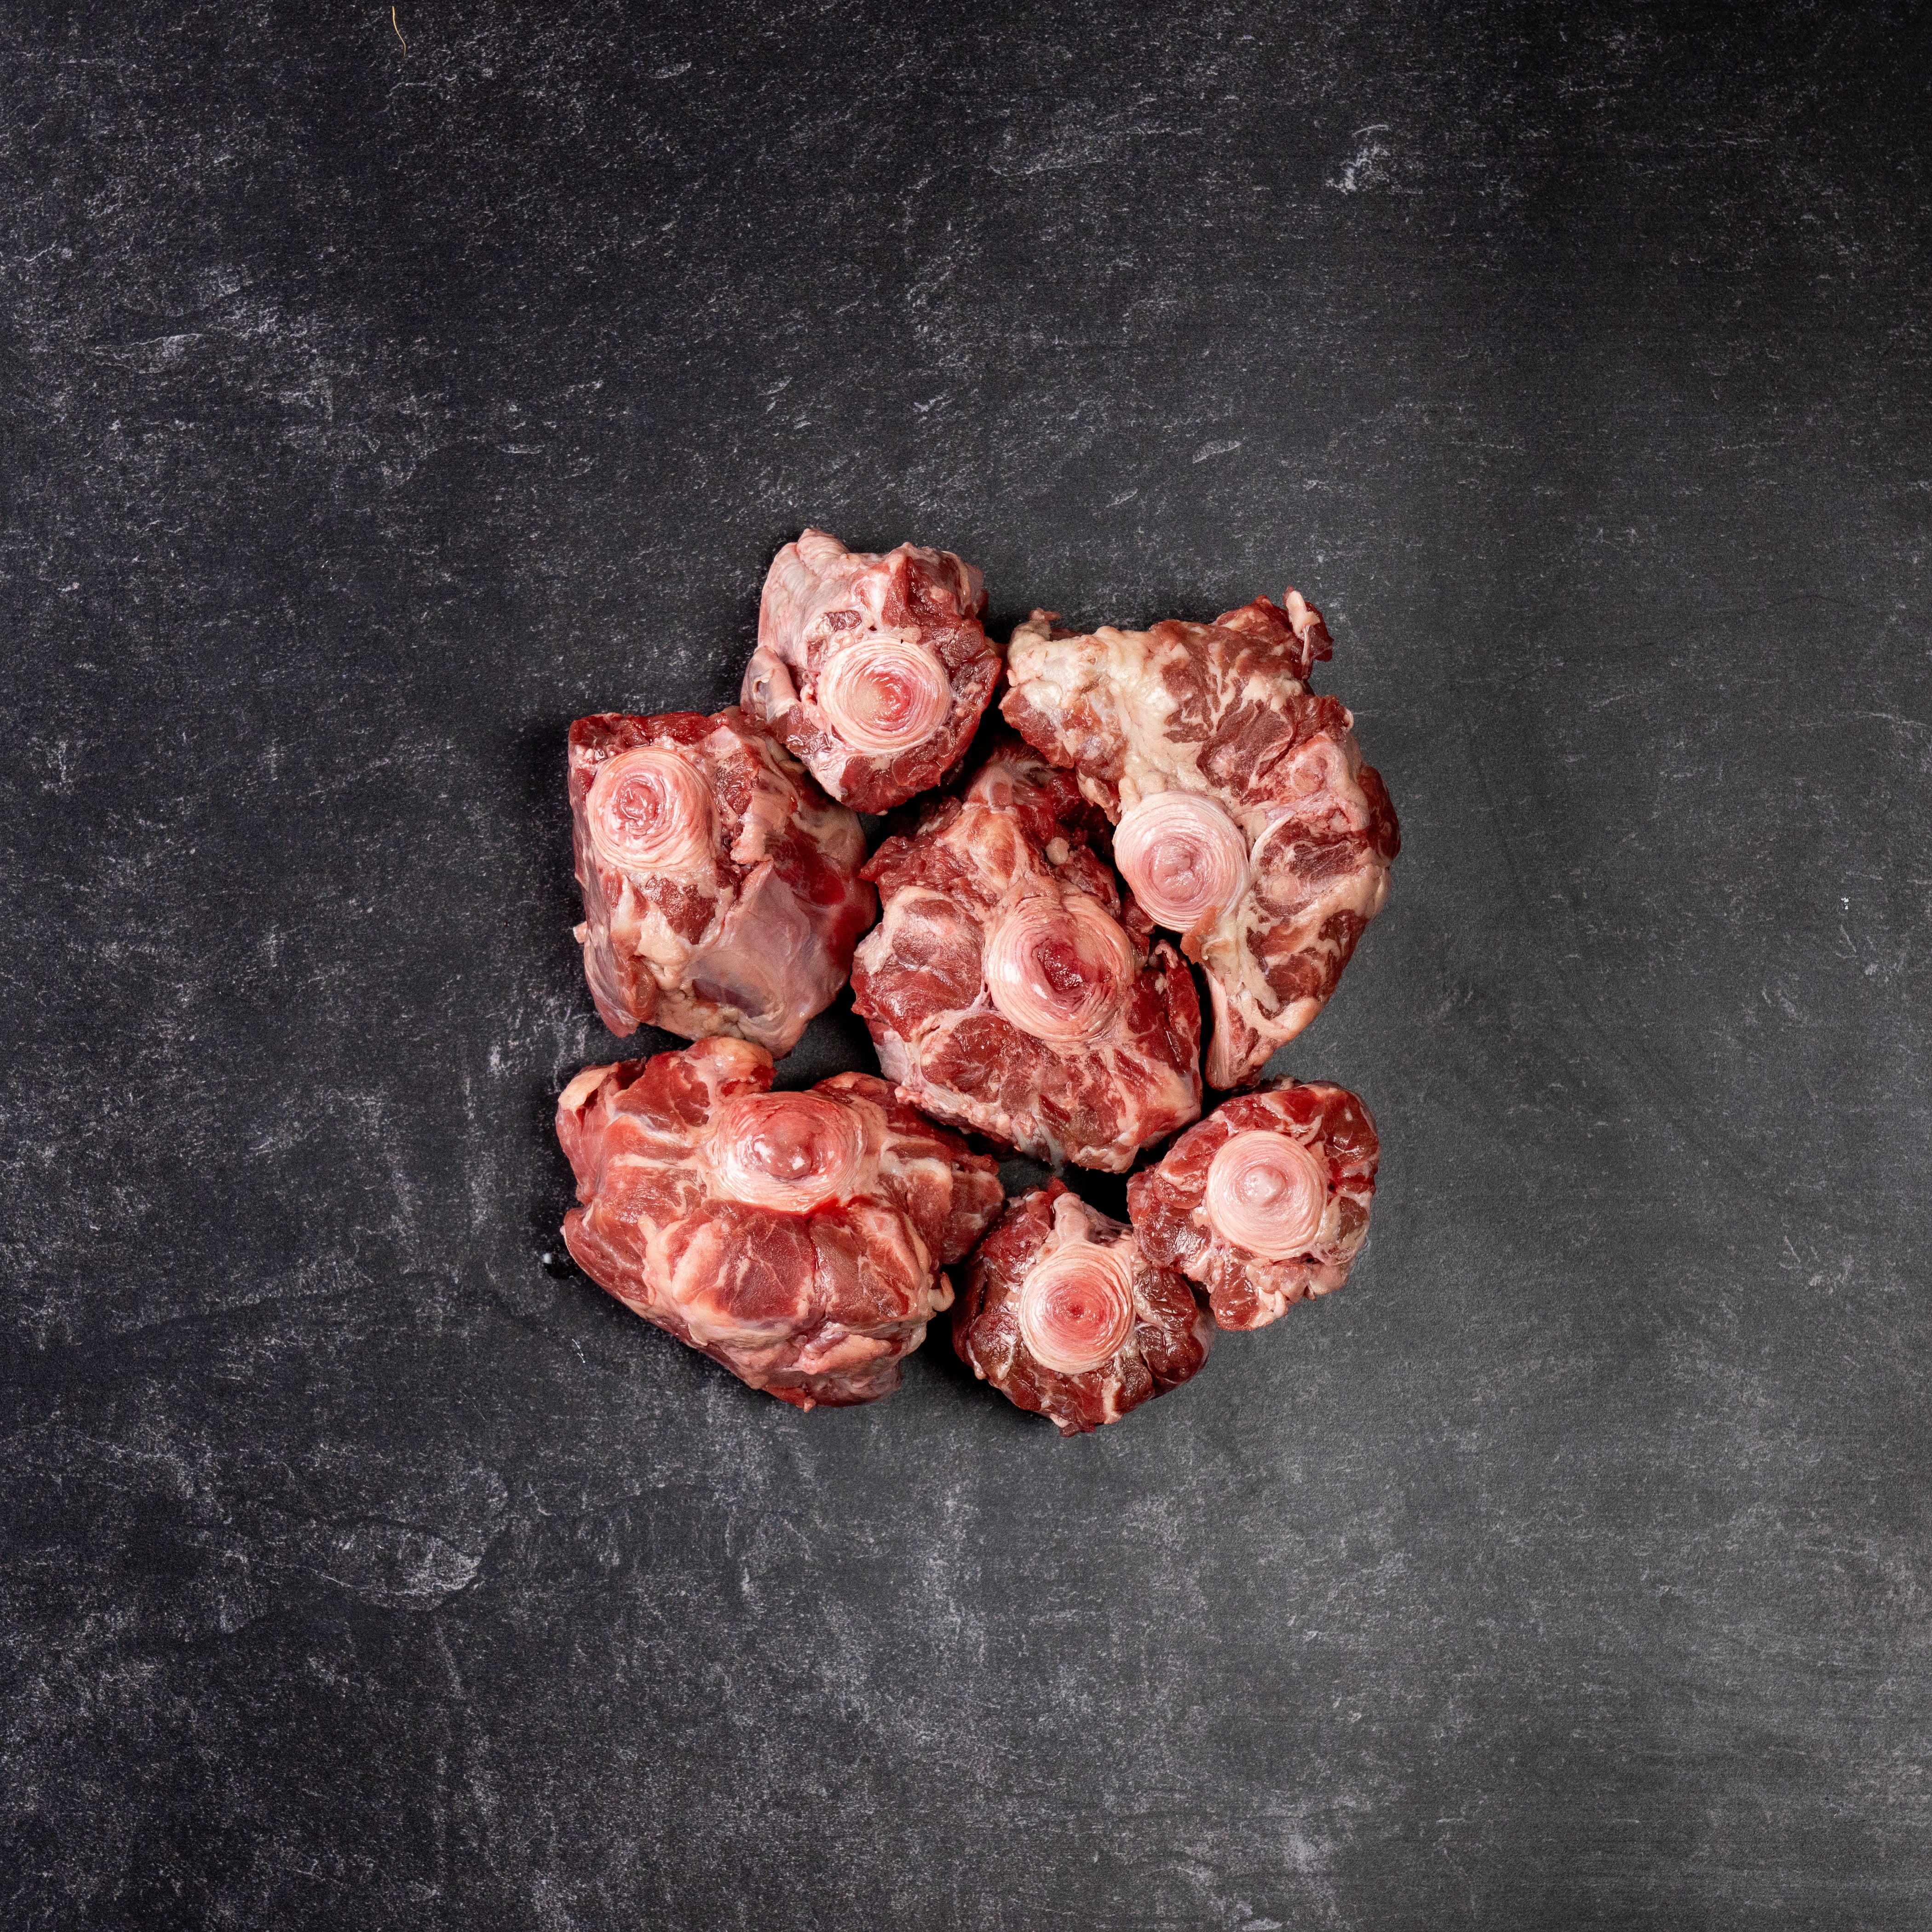 Small pile of oxtail cut of beef on a slab